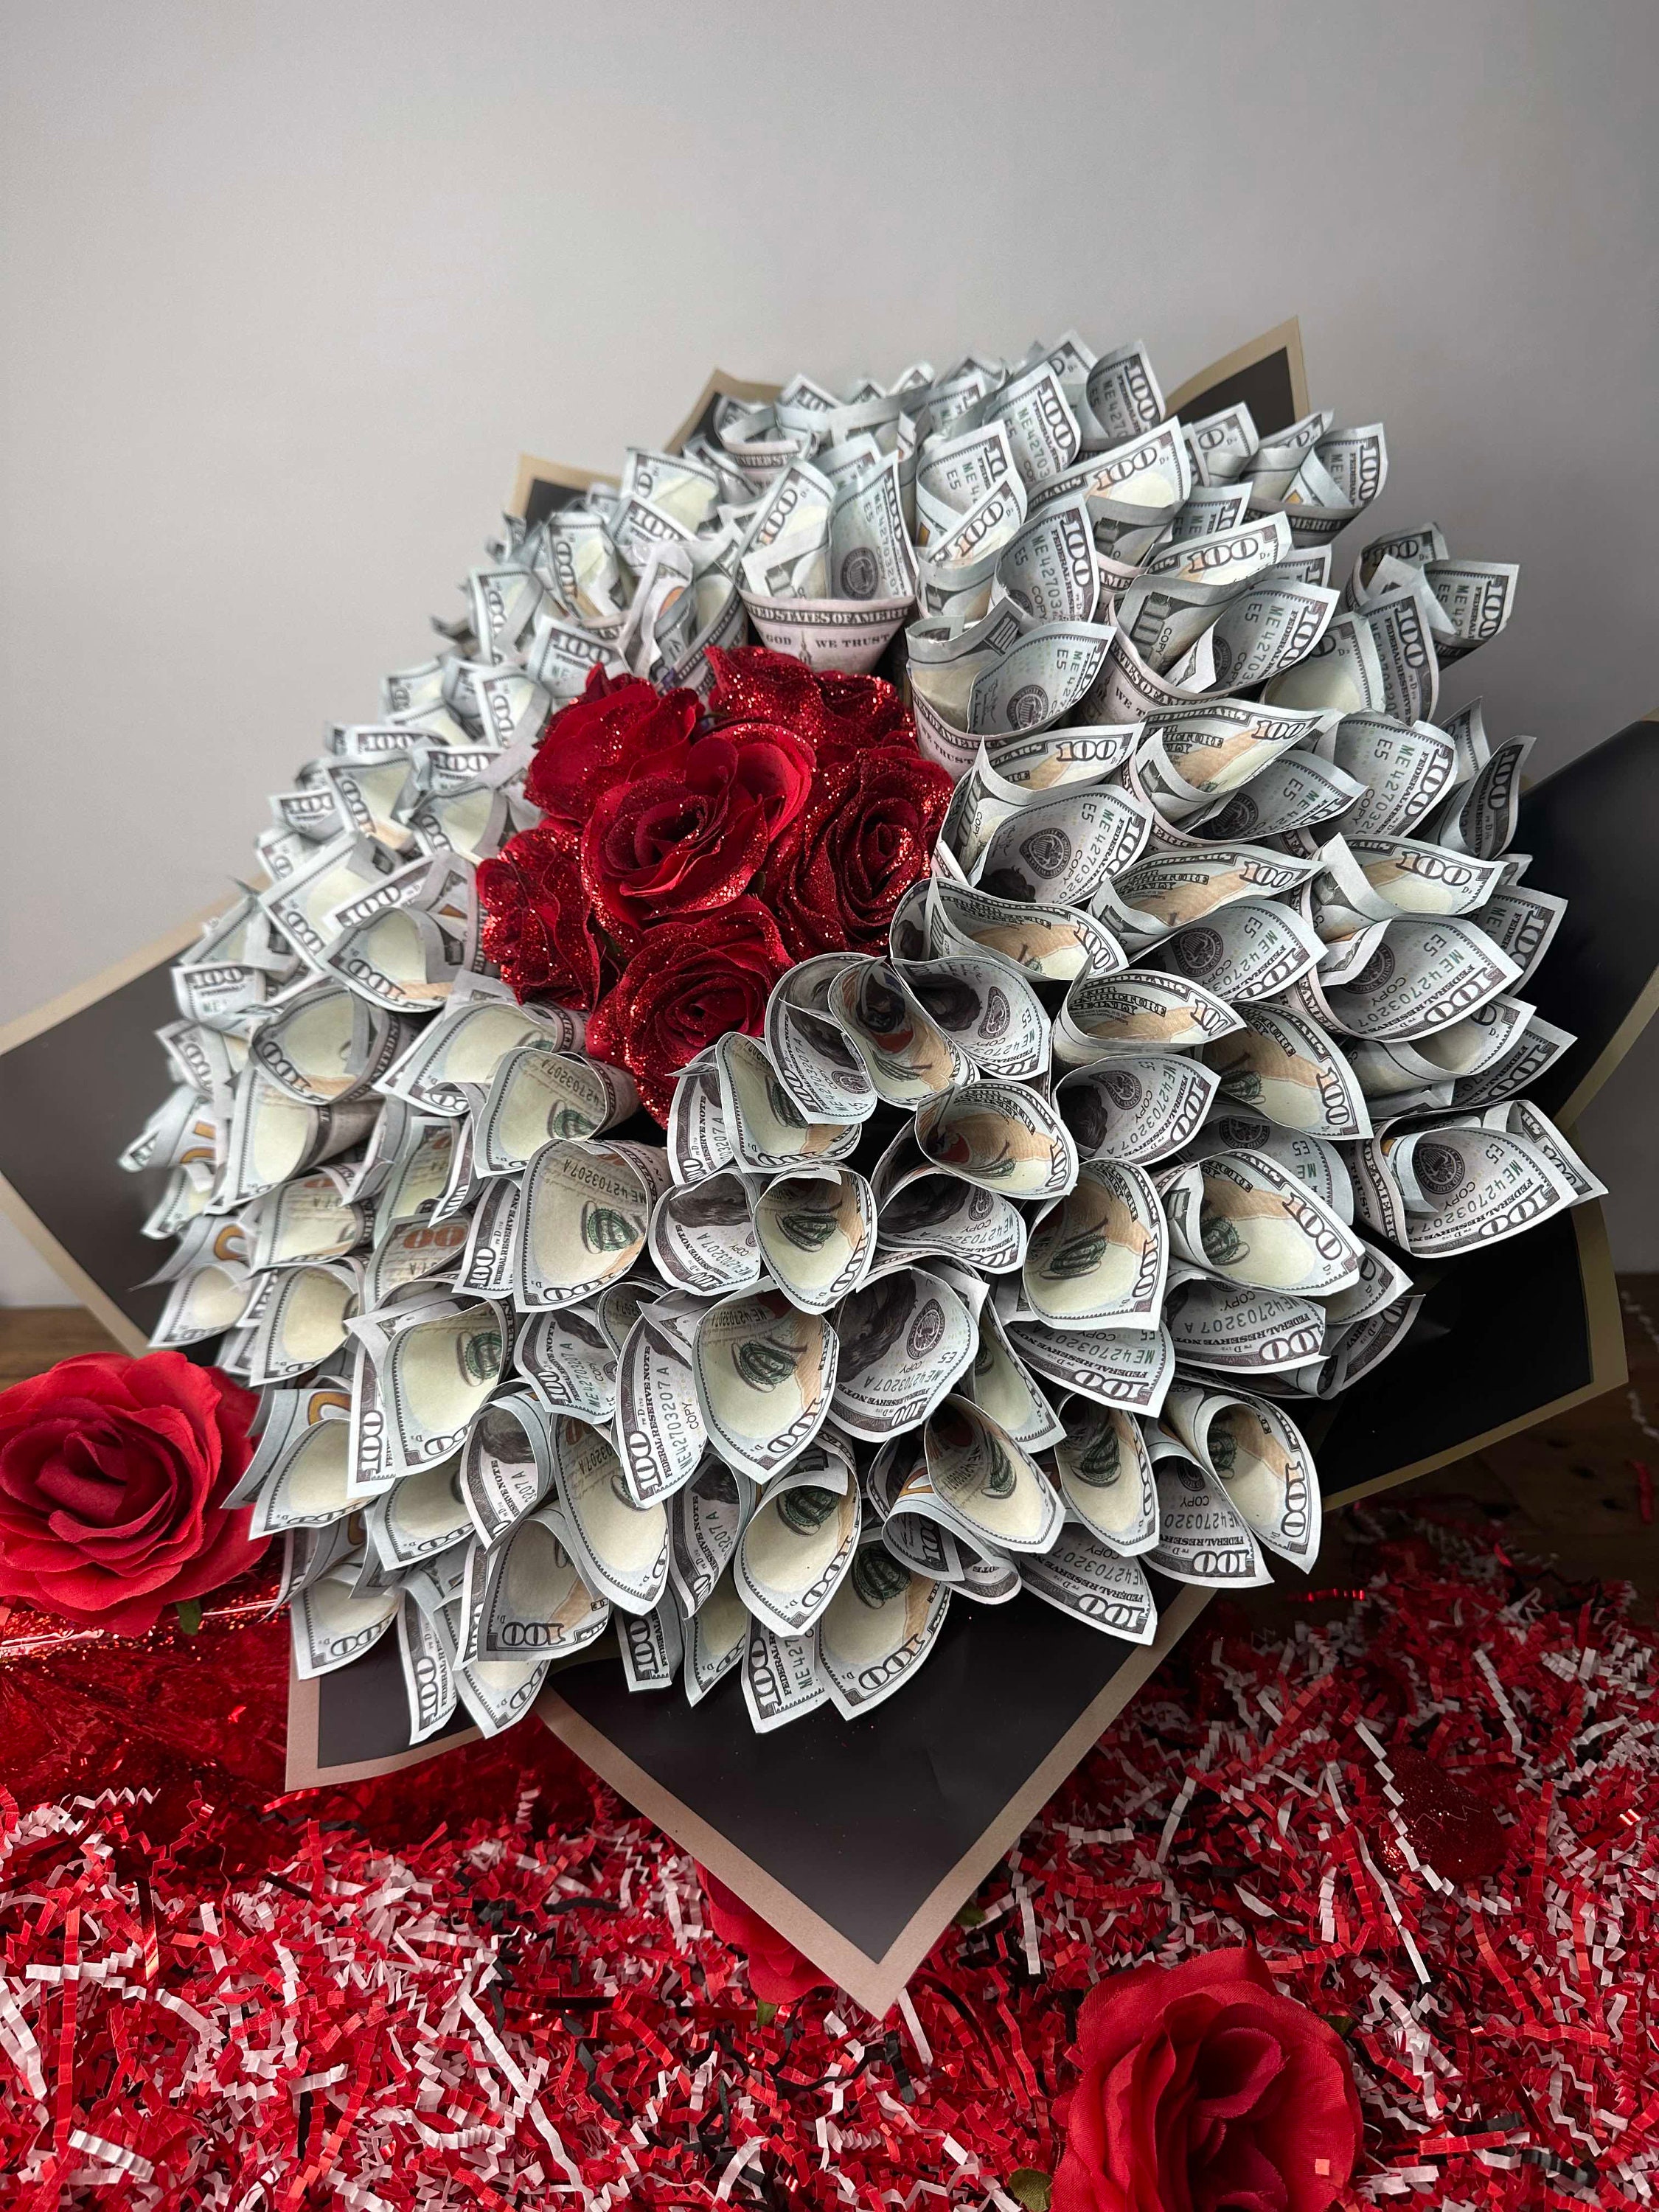 I have almost finished making my diy ribbon rose bouquet for my